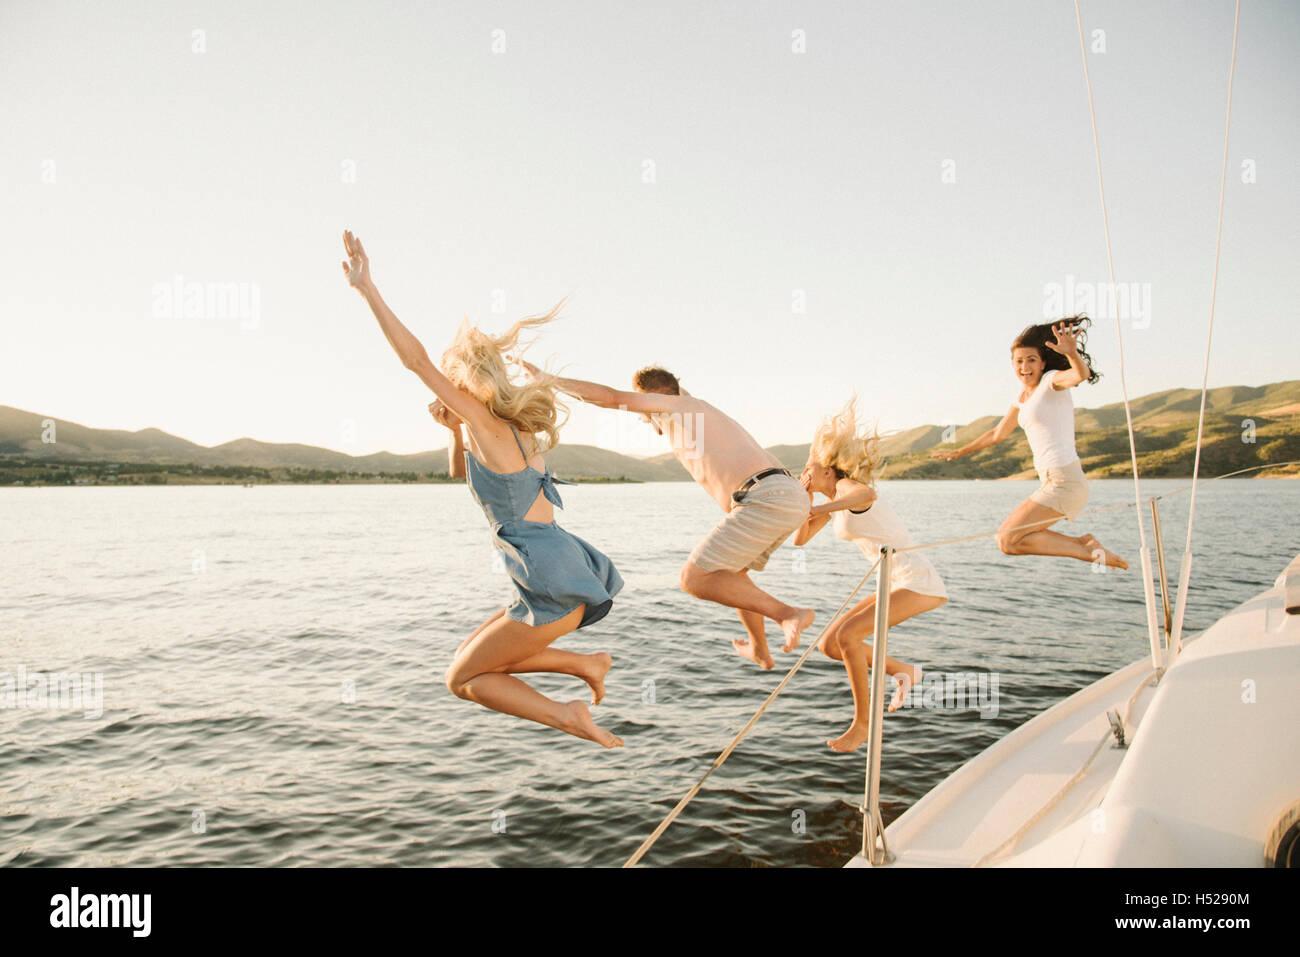 Four people jumping off the side of a sail boat into a lake. Stock Photo